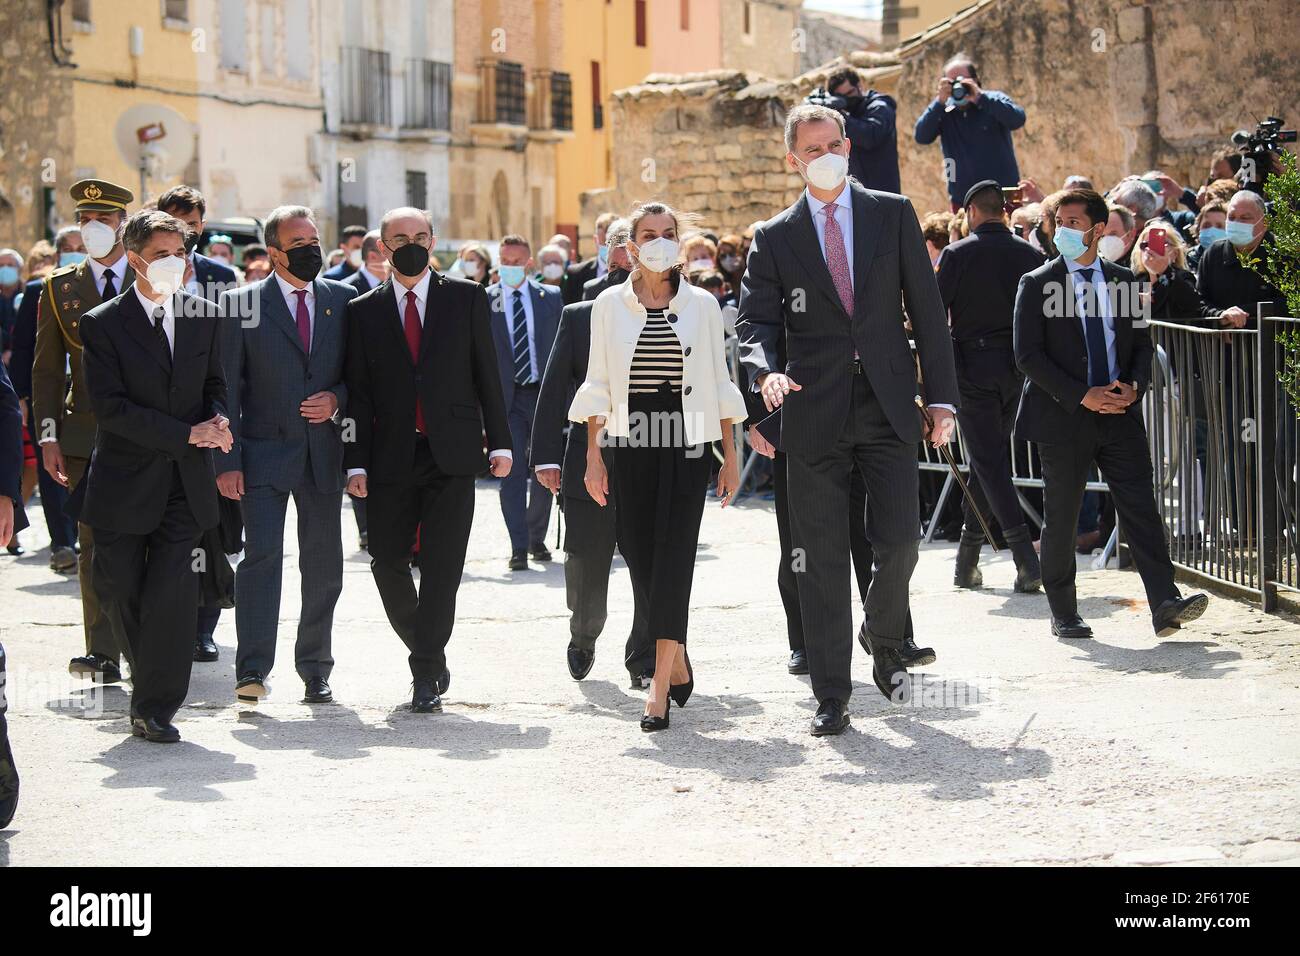 Fuendetodos, Aragon, Spain. 29th Mar, 2021. King Felipe VI of Spain, Queen Letizia of Spain visit Fuendetodos in the framework of the commemoration of the 275th anniversary of the birth of Francisco de Goya at Goya's birthplace on March 29, 2021 in Fuendetodos, Spain Credit: Jack Abuin/ZUMA Wire/Alamy Live News Stock Photo